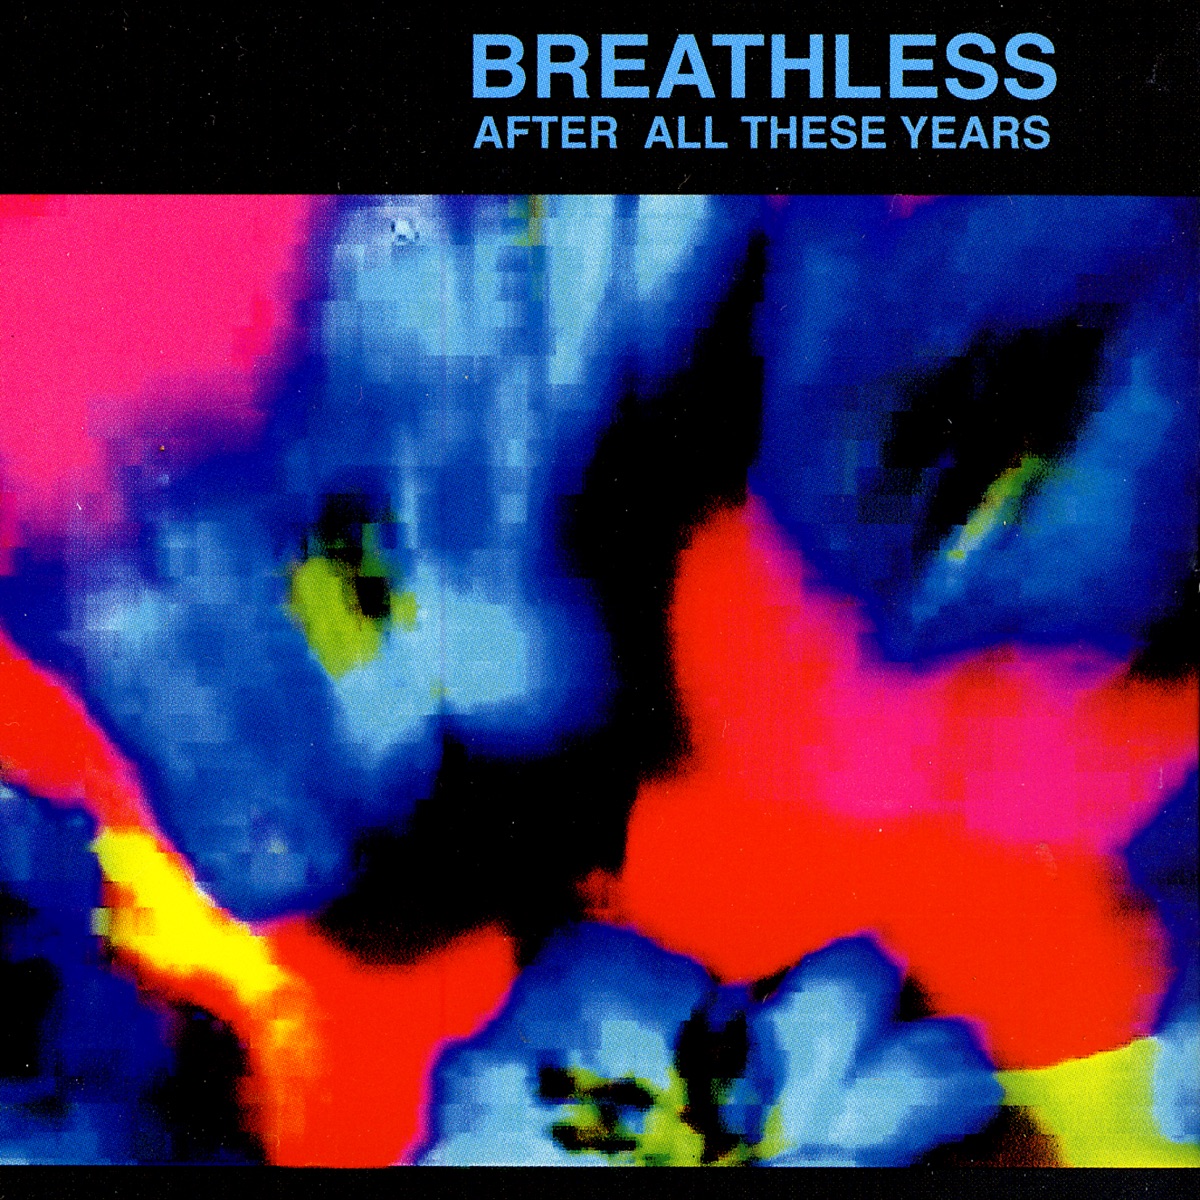 Behind the Light - Album by Breathless - Apple Music